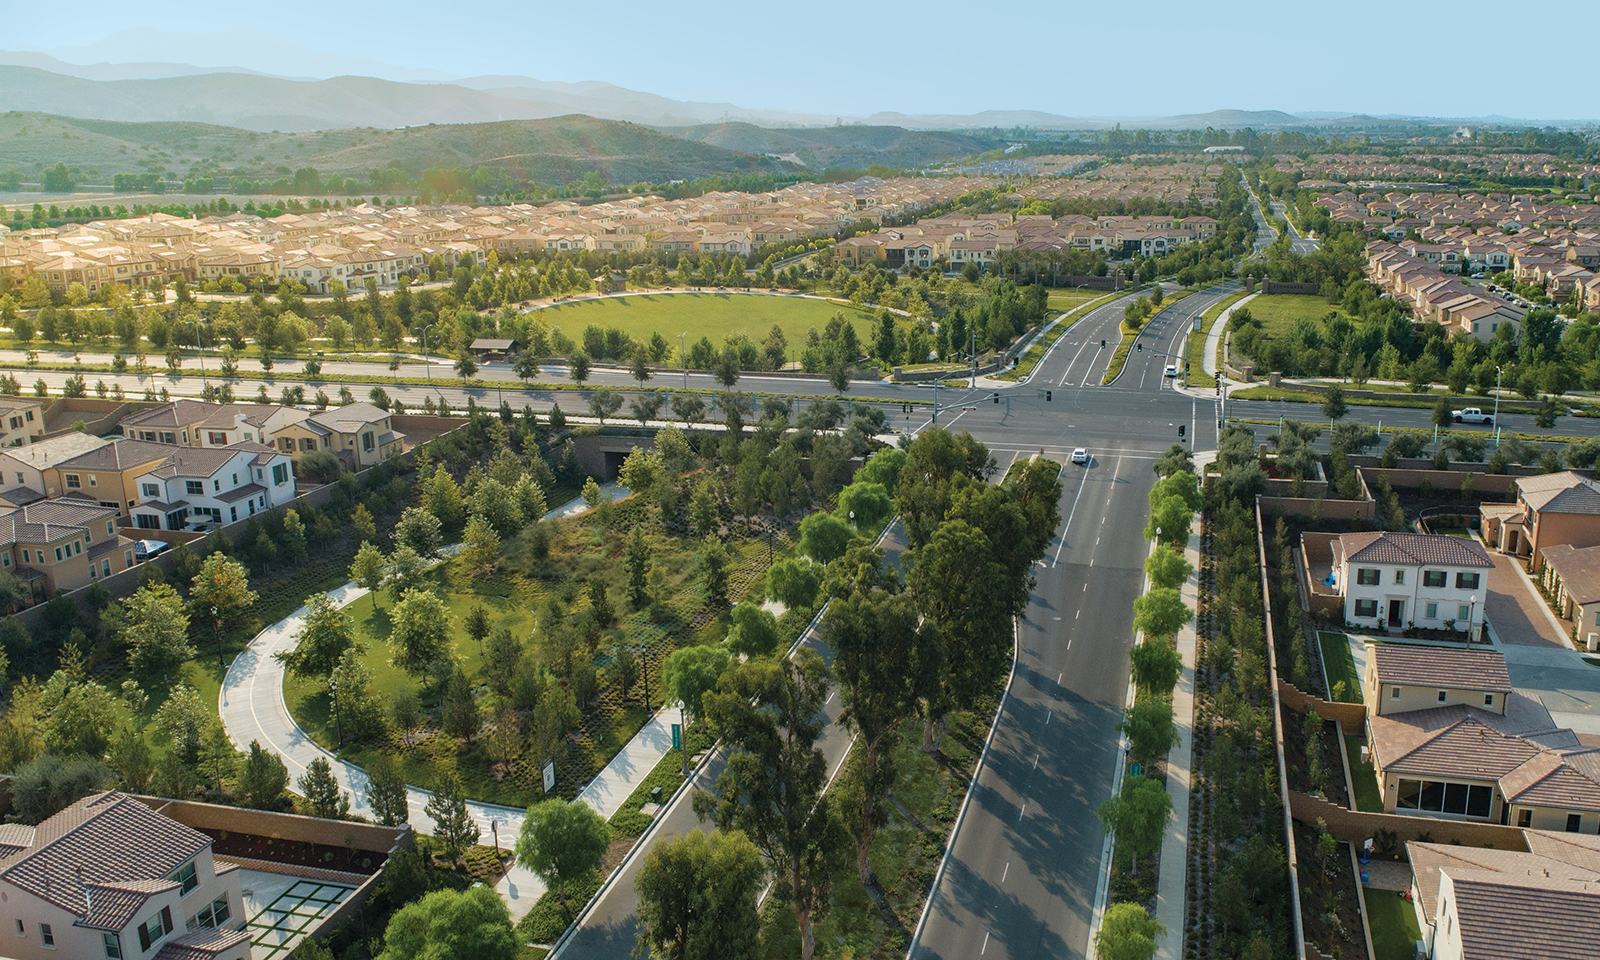 Irvine’s early attention to infrastructure pays off